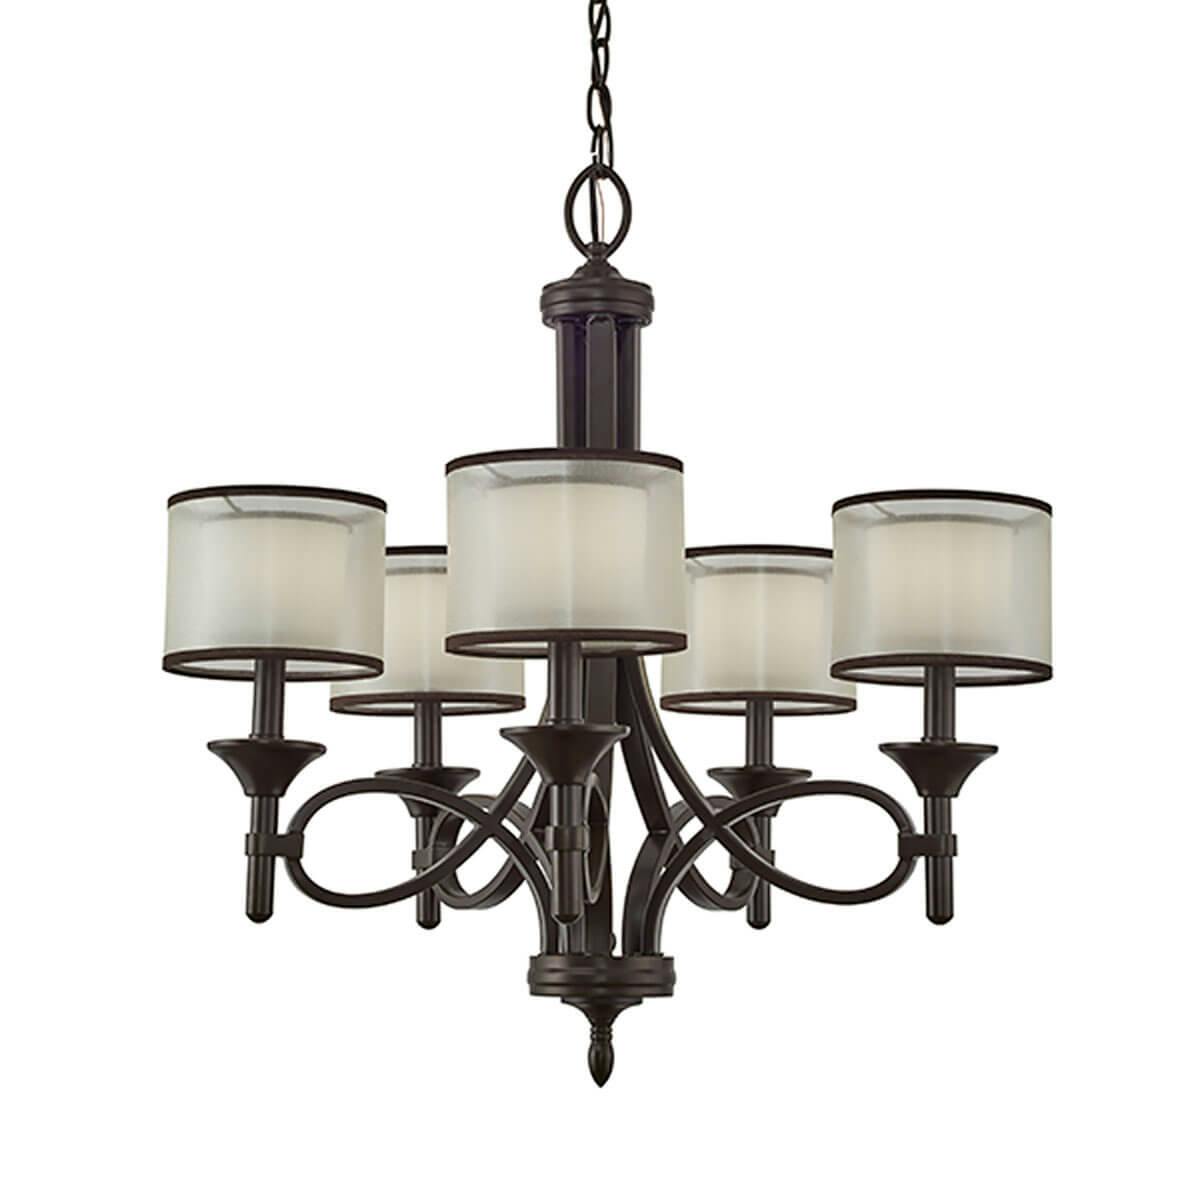 Lacey 26" 5 Light Chandelier in Bronze without the canopy on a white background